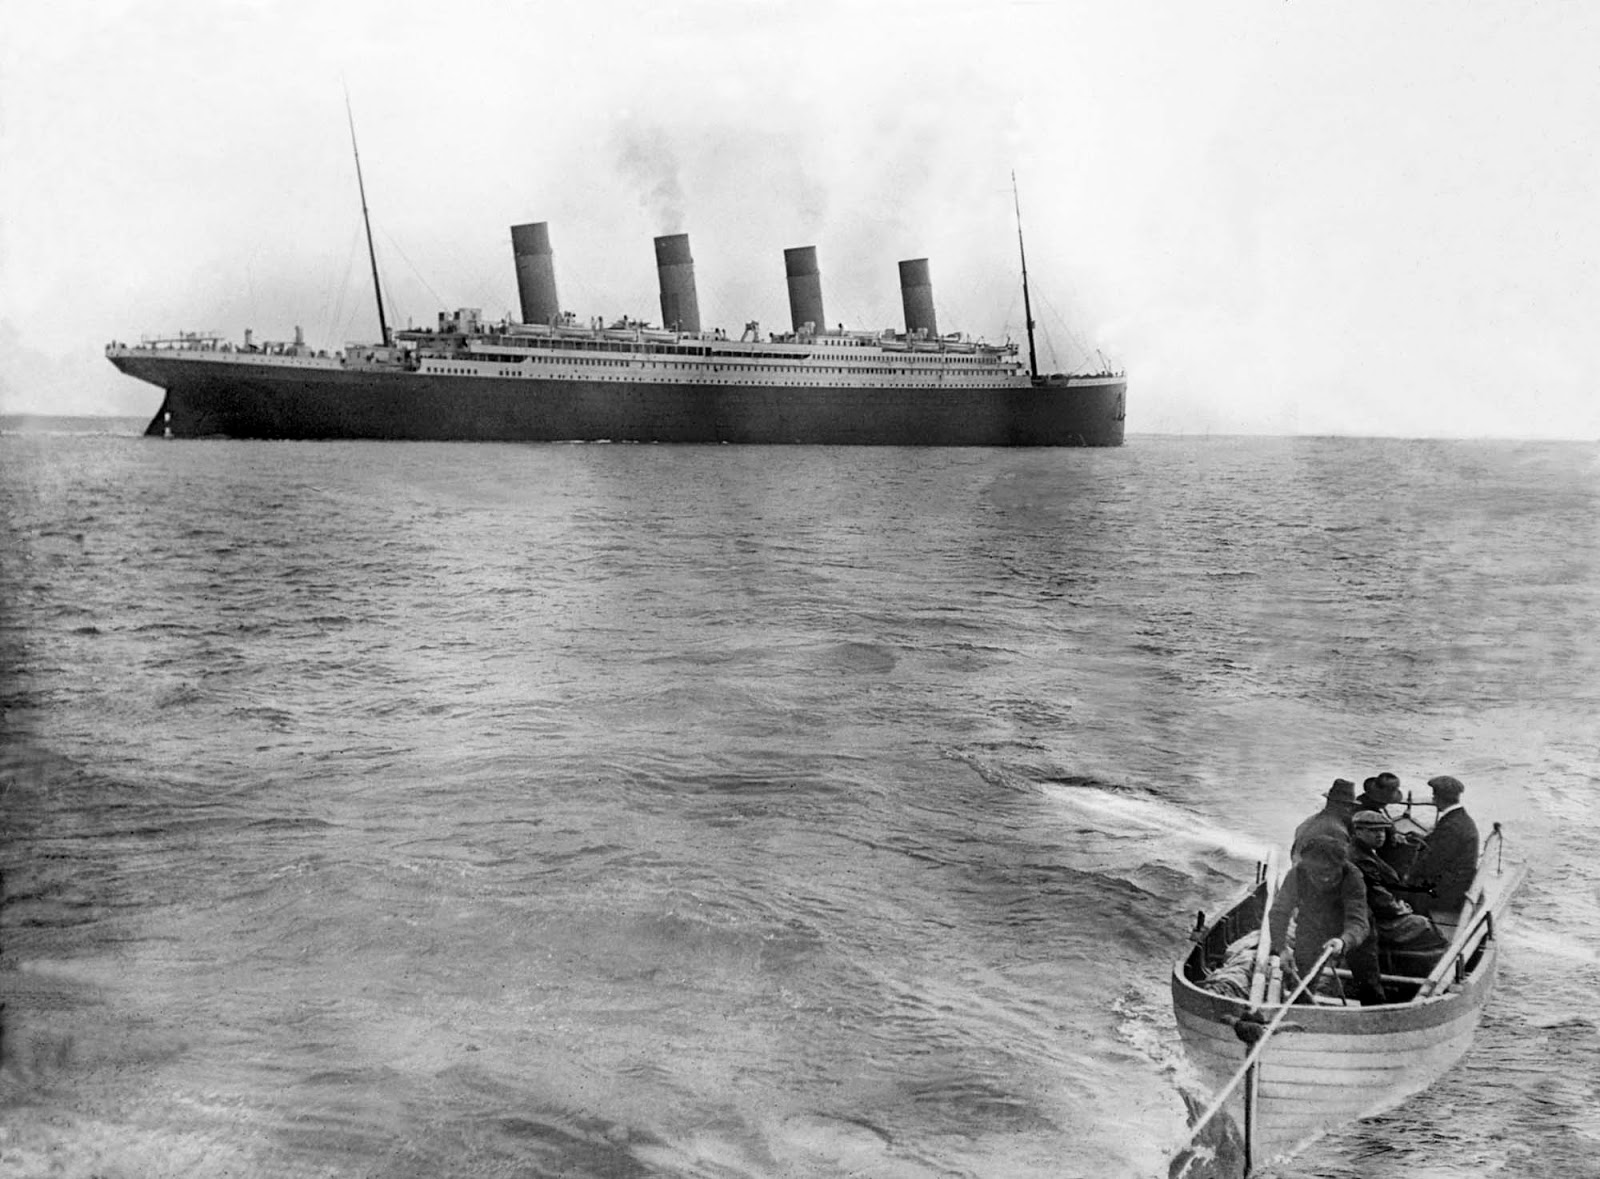 THE TITANIC SACRIFICE: Was It Doomed From The Start?